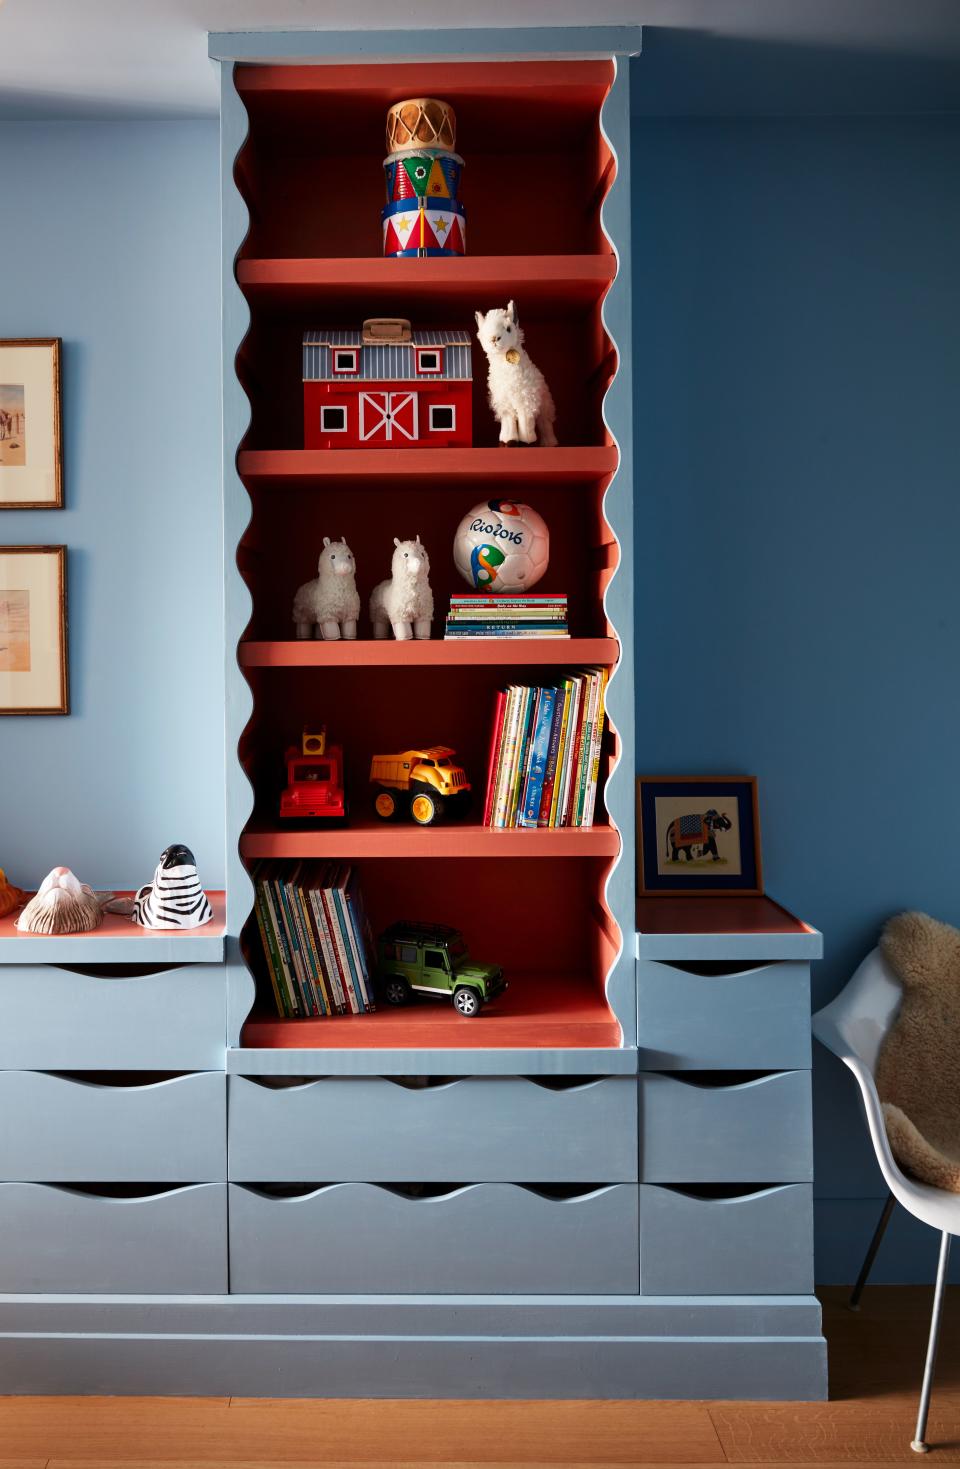 Valle used the wavy edge motif from the living room for the shelves and drawers in his son’s room, painted in Farrow & Ball’s Lulworth Blue.